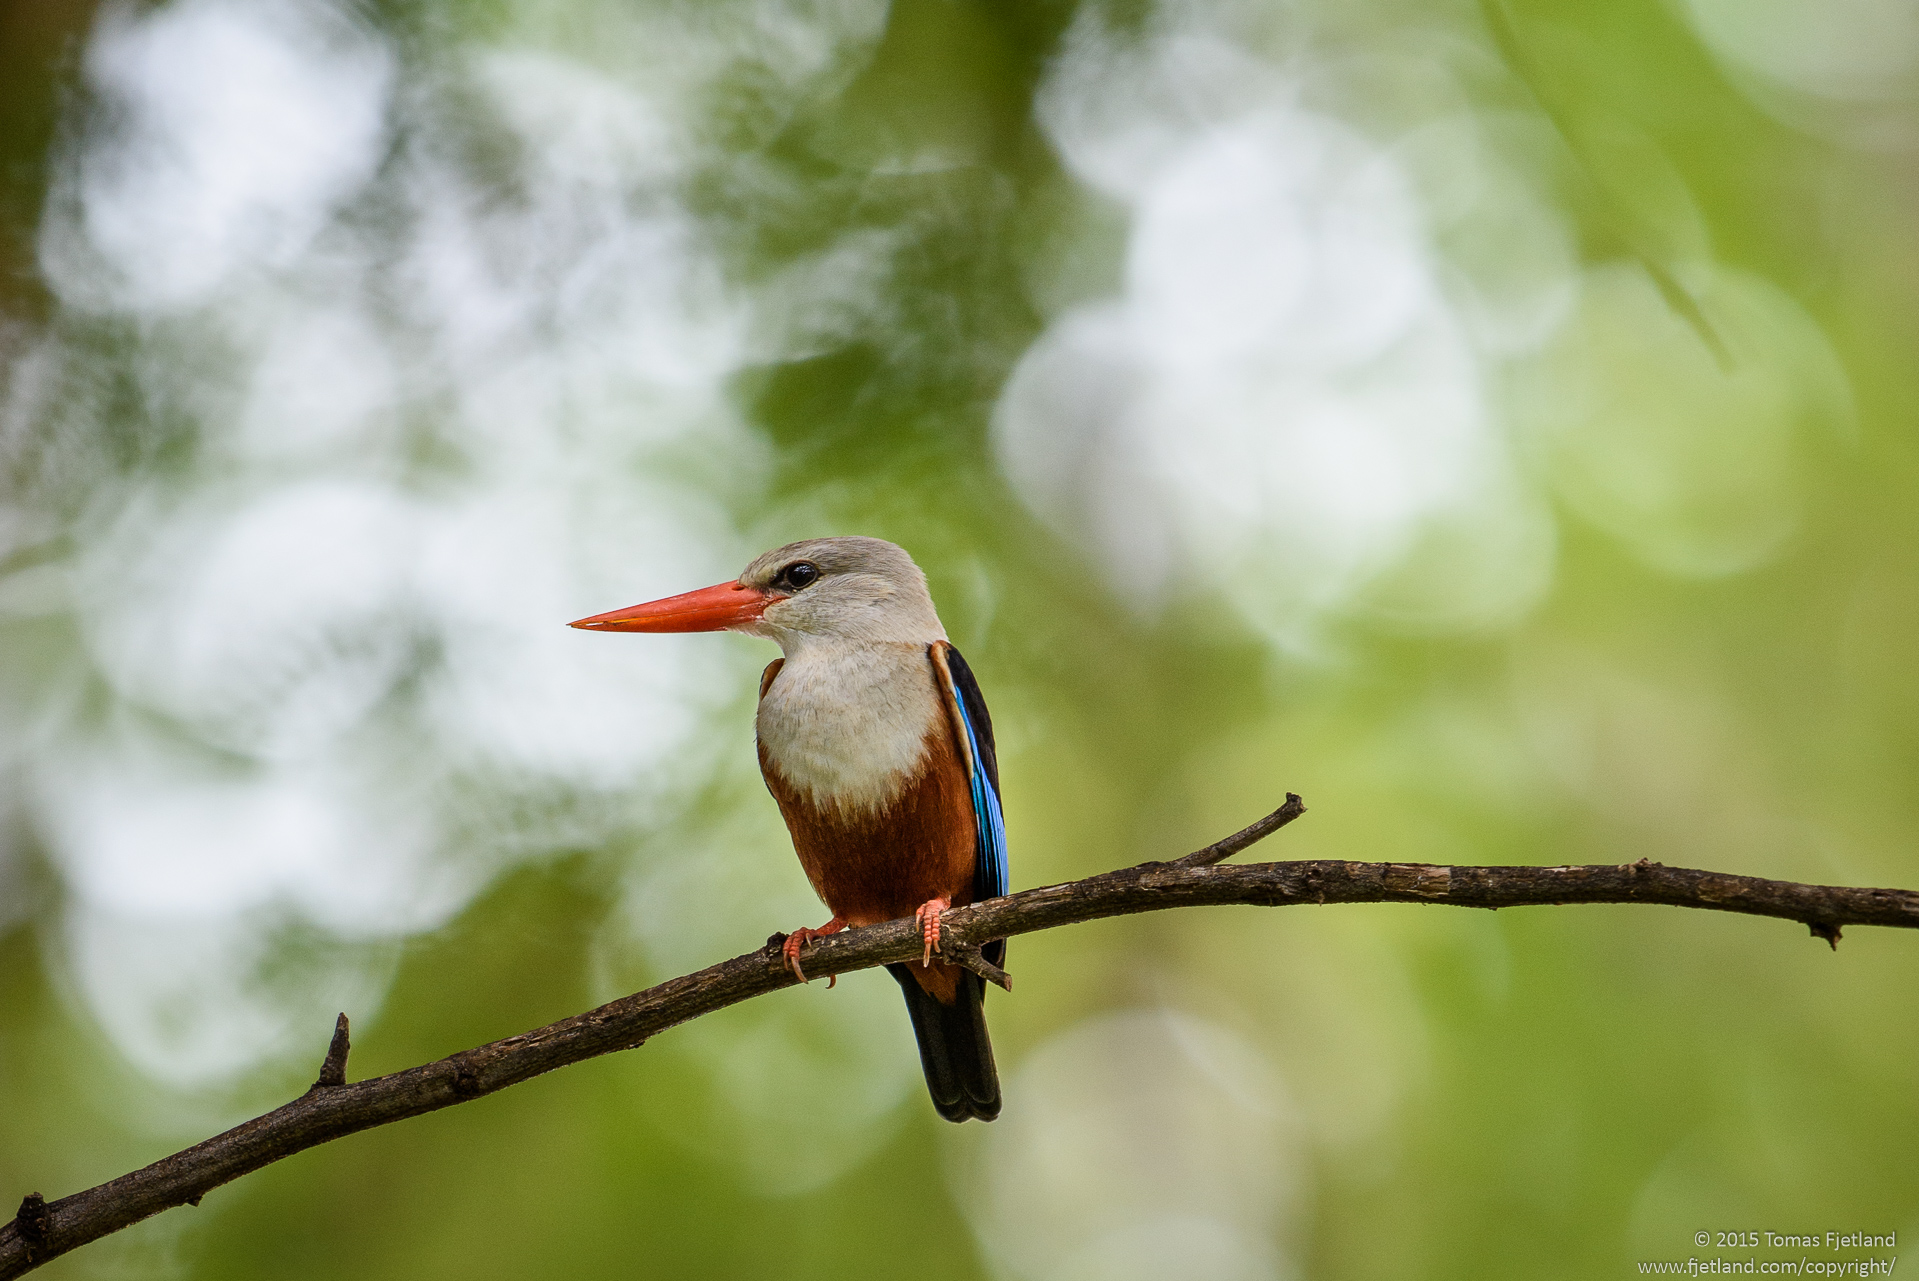 Grey-headed kingfisher perched on a branch right next to the "Lobby" tent inside Larsens camp